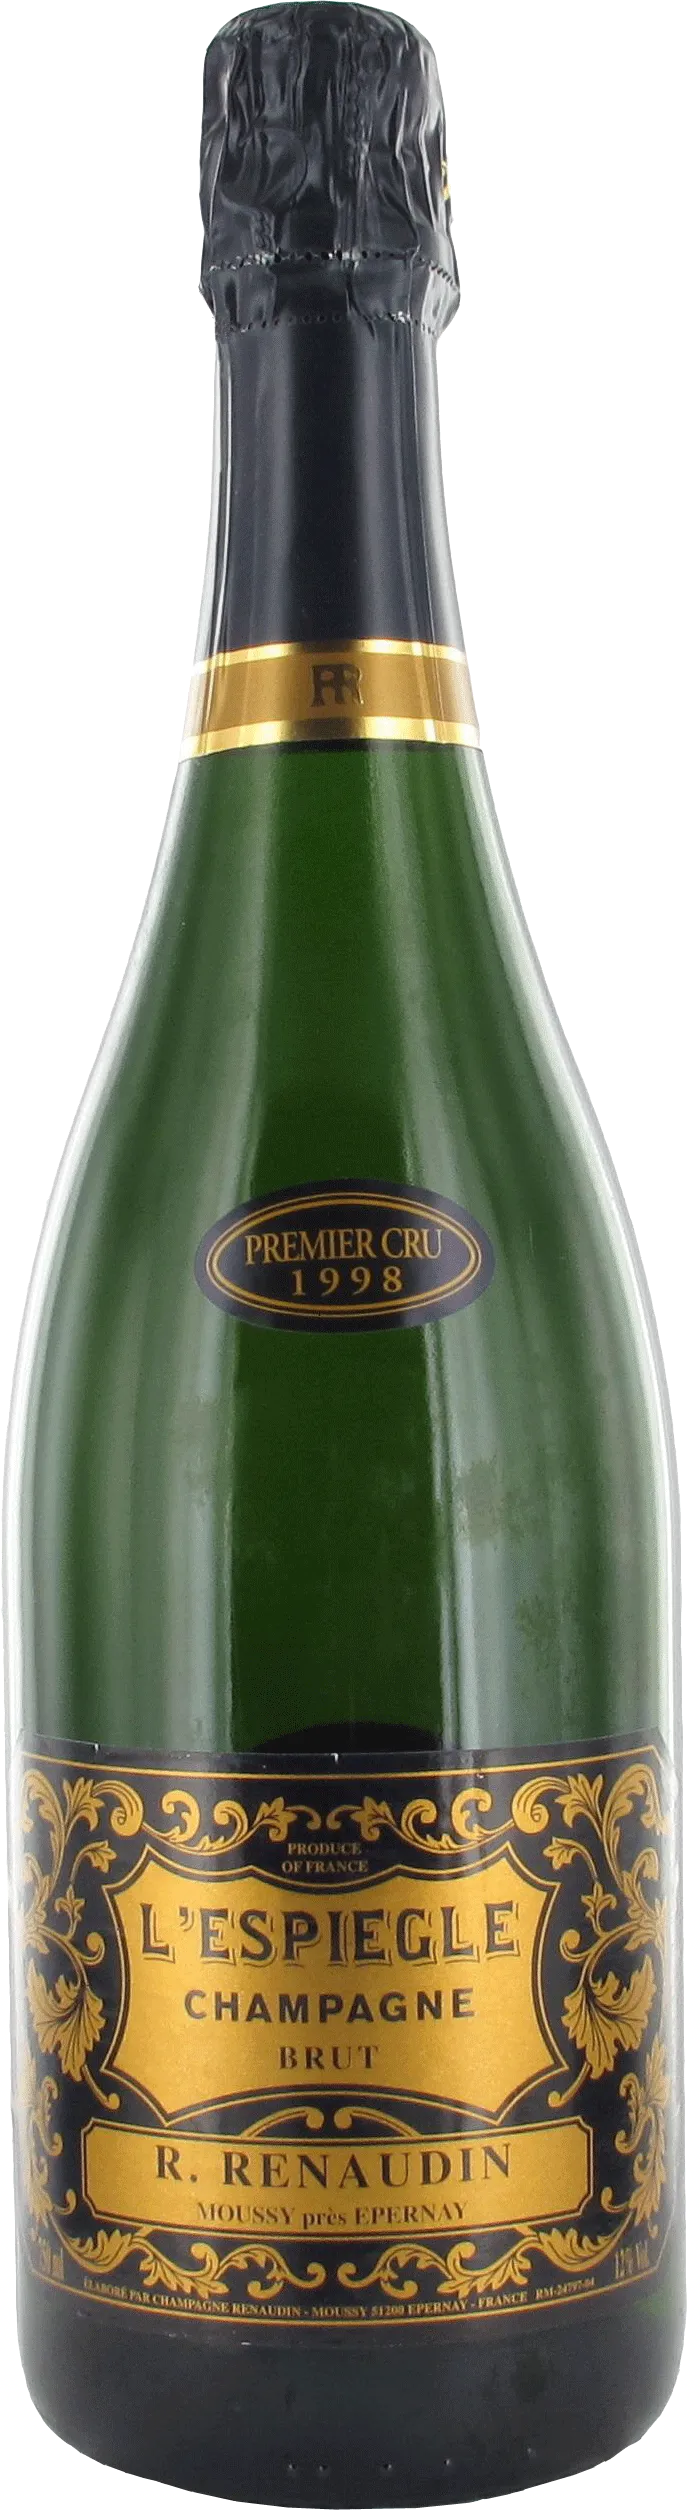 Bottle of R. Renaudin Brut Réserve Champagne from search results